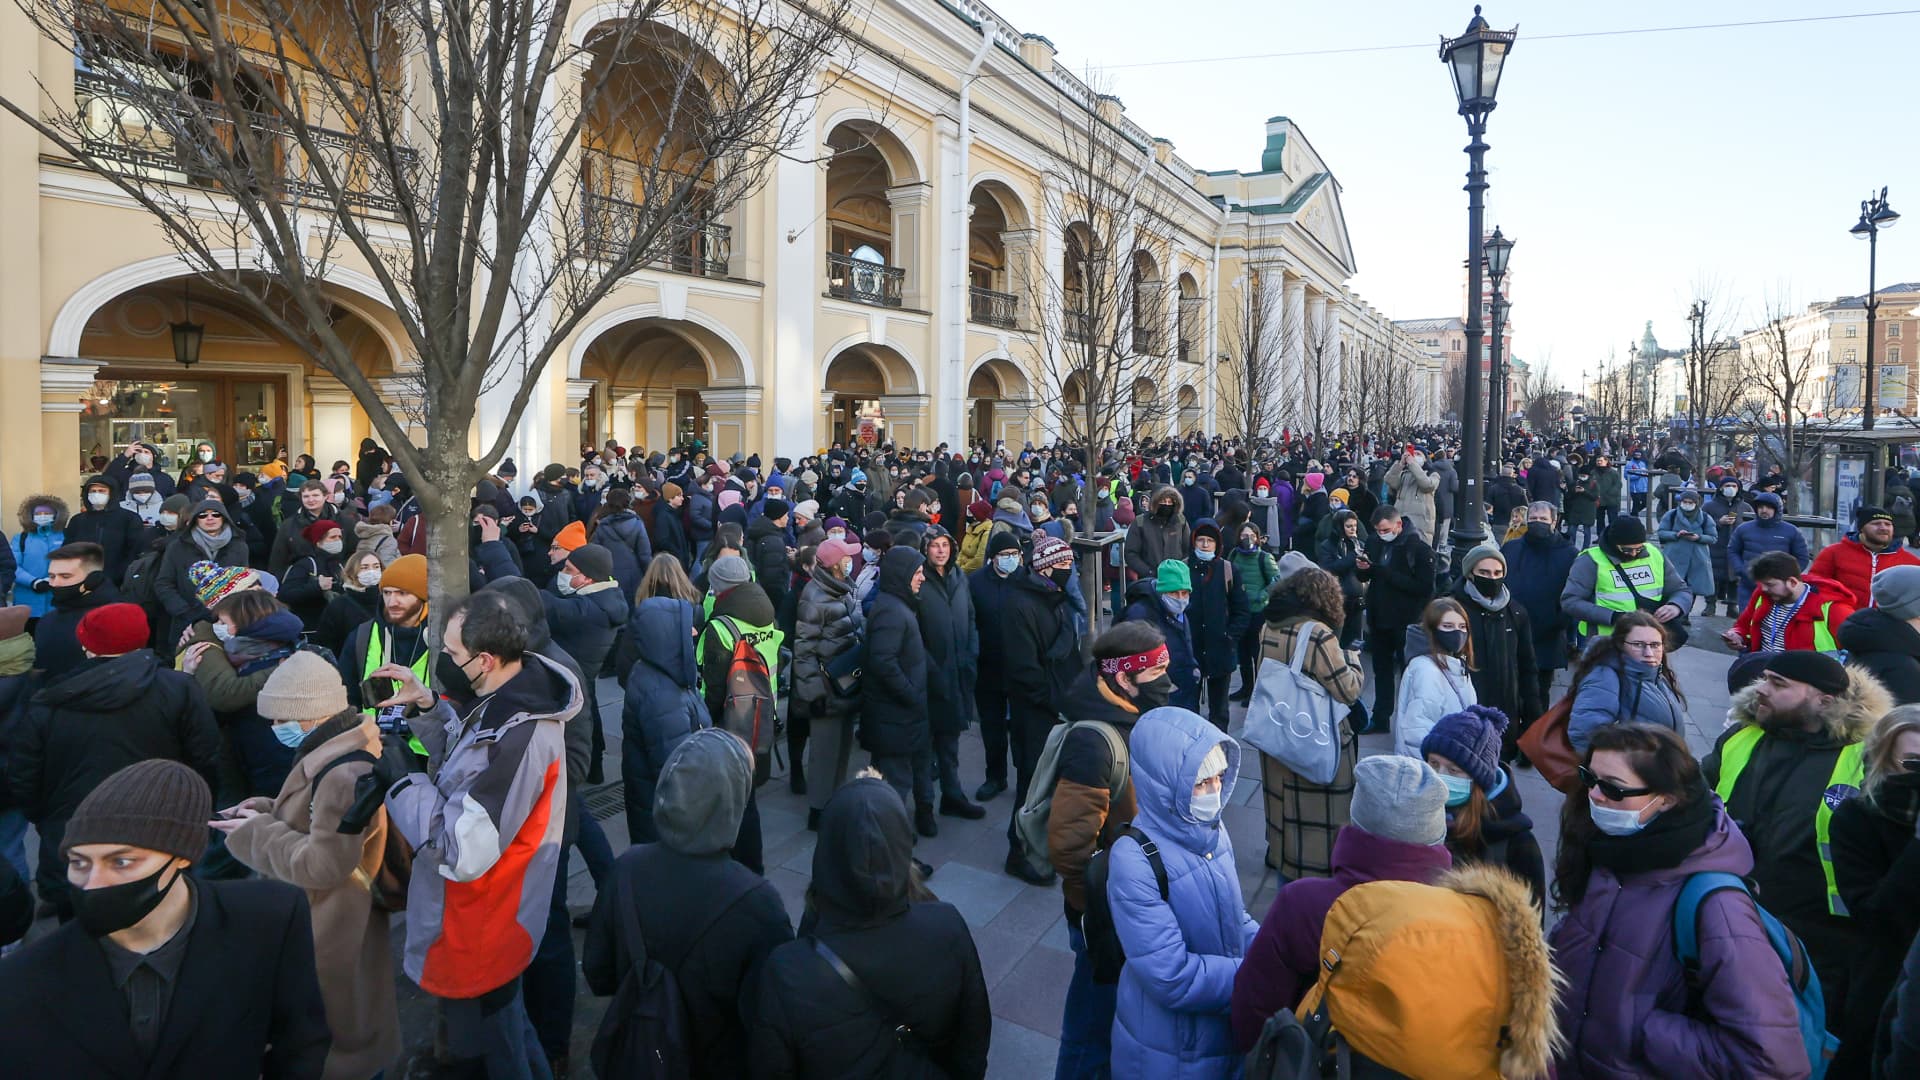 Participants in an unauthorized rally in central St Petersburg against the Russian military operation in Ukraine. Early on February 24, President Putin announced a special military operation by the Russian Armed Forces in response to appeals for help from the leaders of the Donetsk and the Lugansk People's Republics.